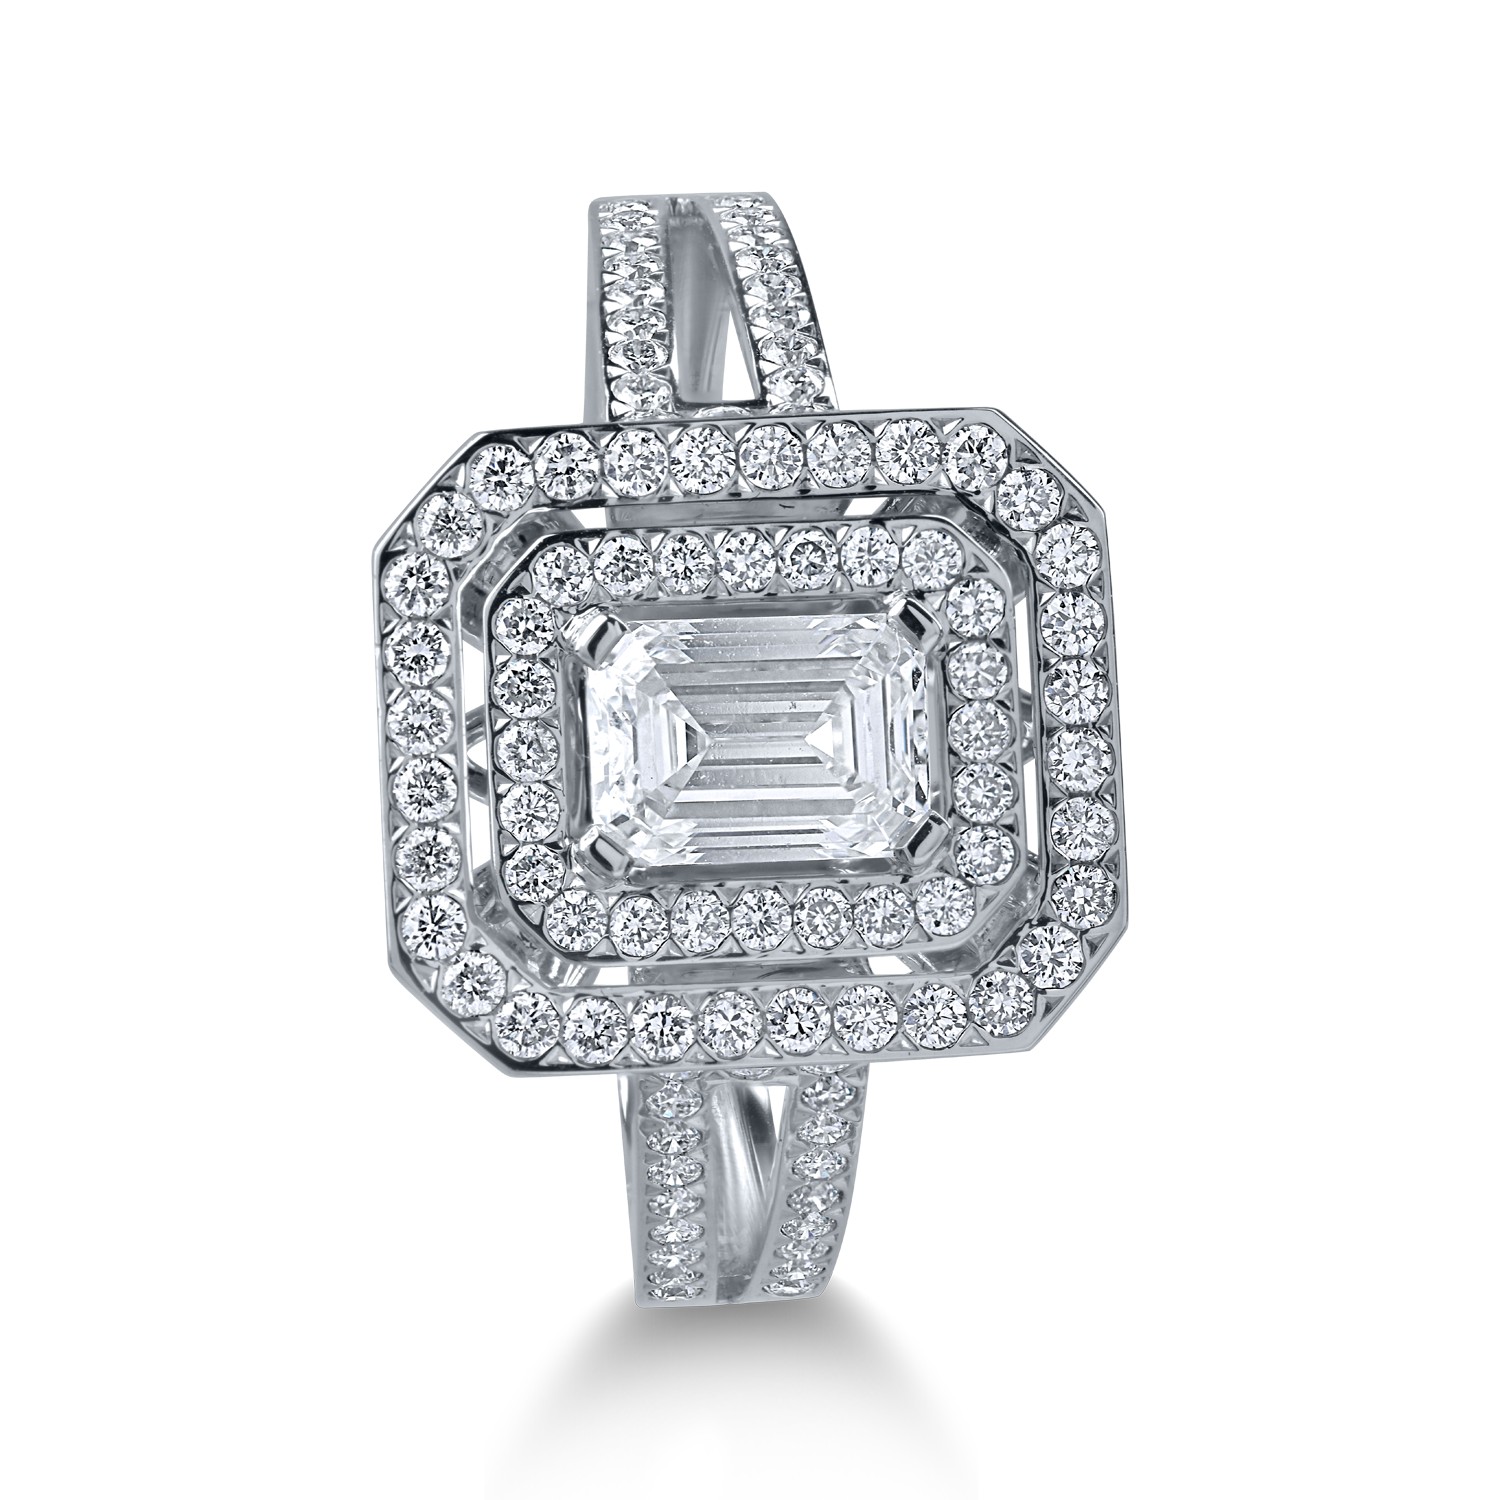 White gold engagement ring with 1.2ct diamonds